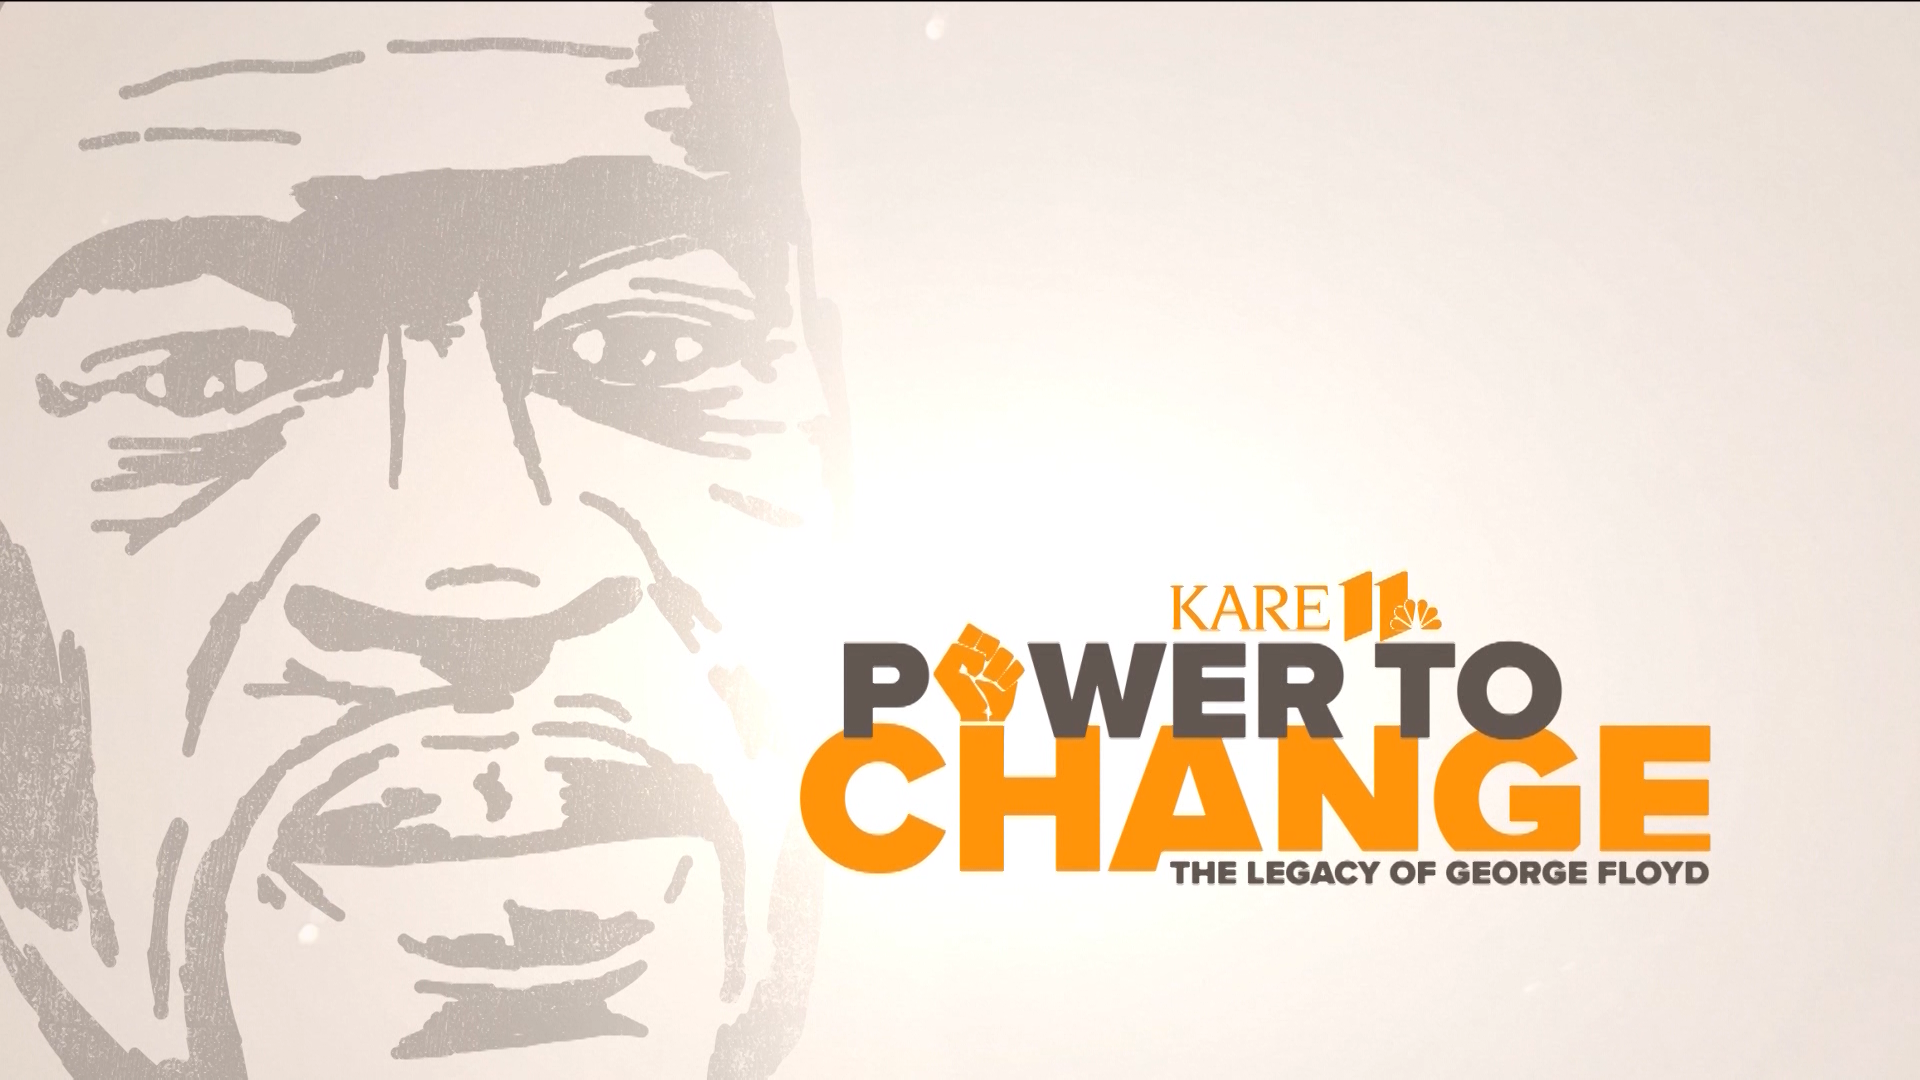 This special focuses on those turning the power of protest into meaningful change.